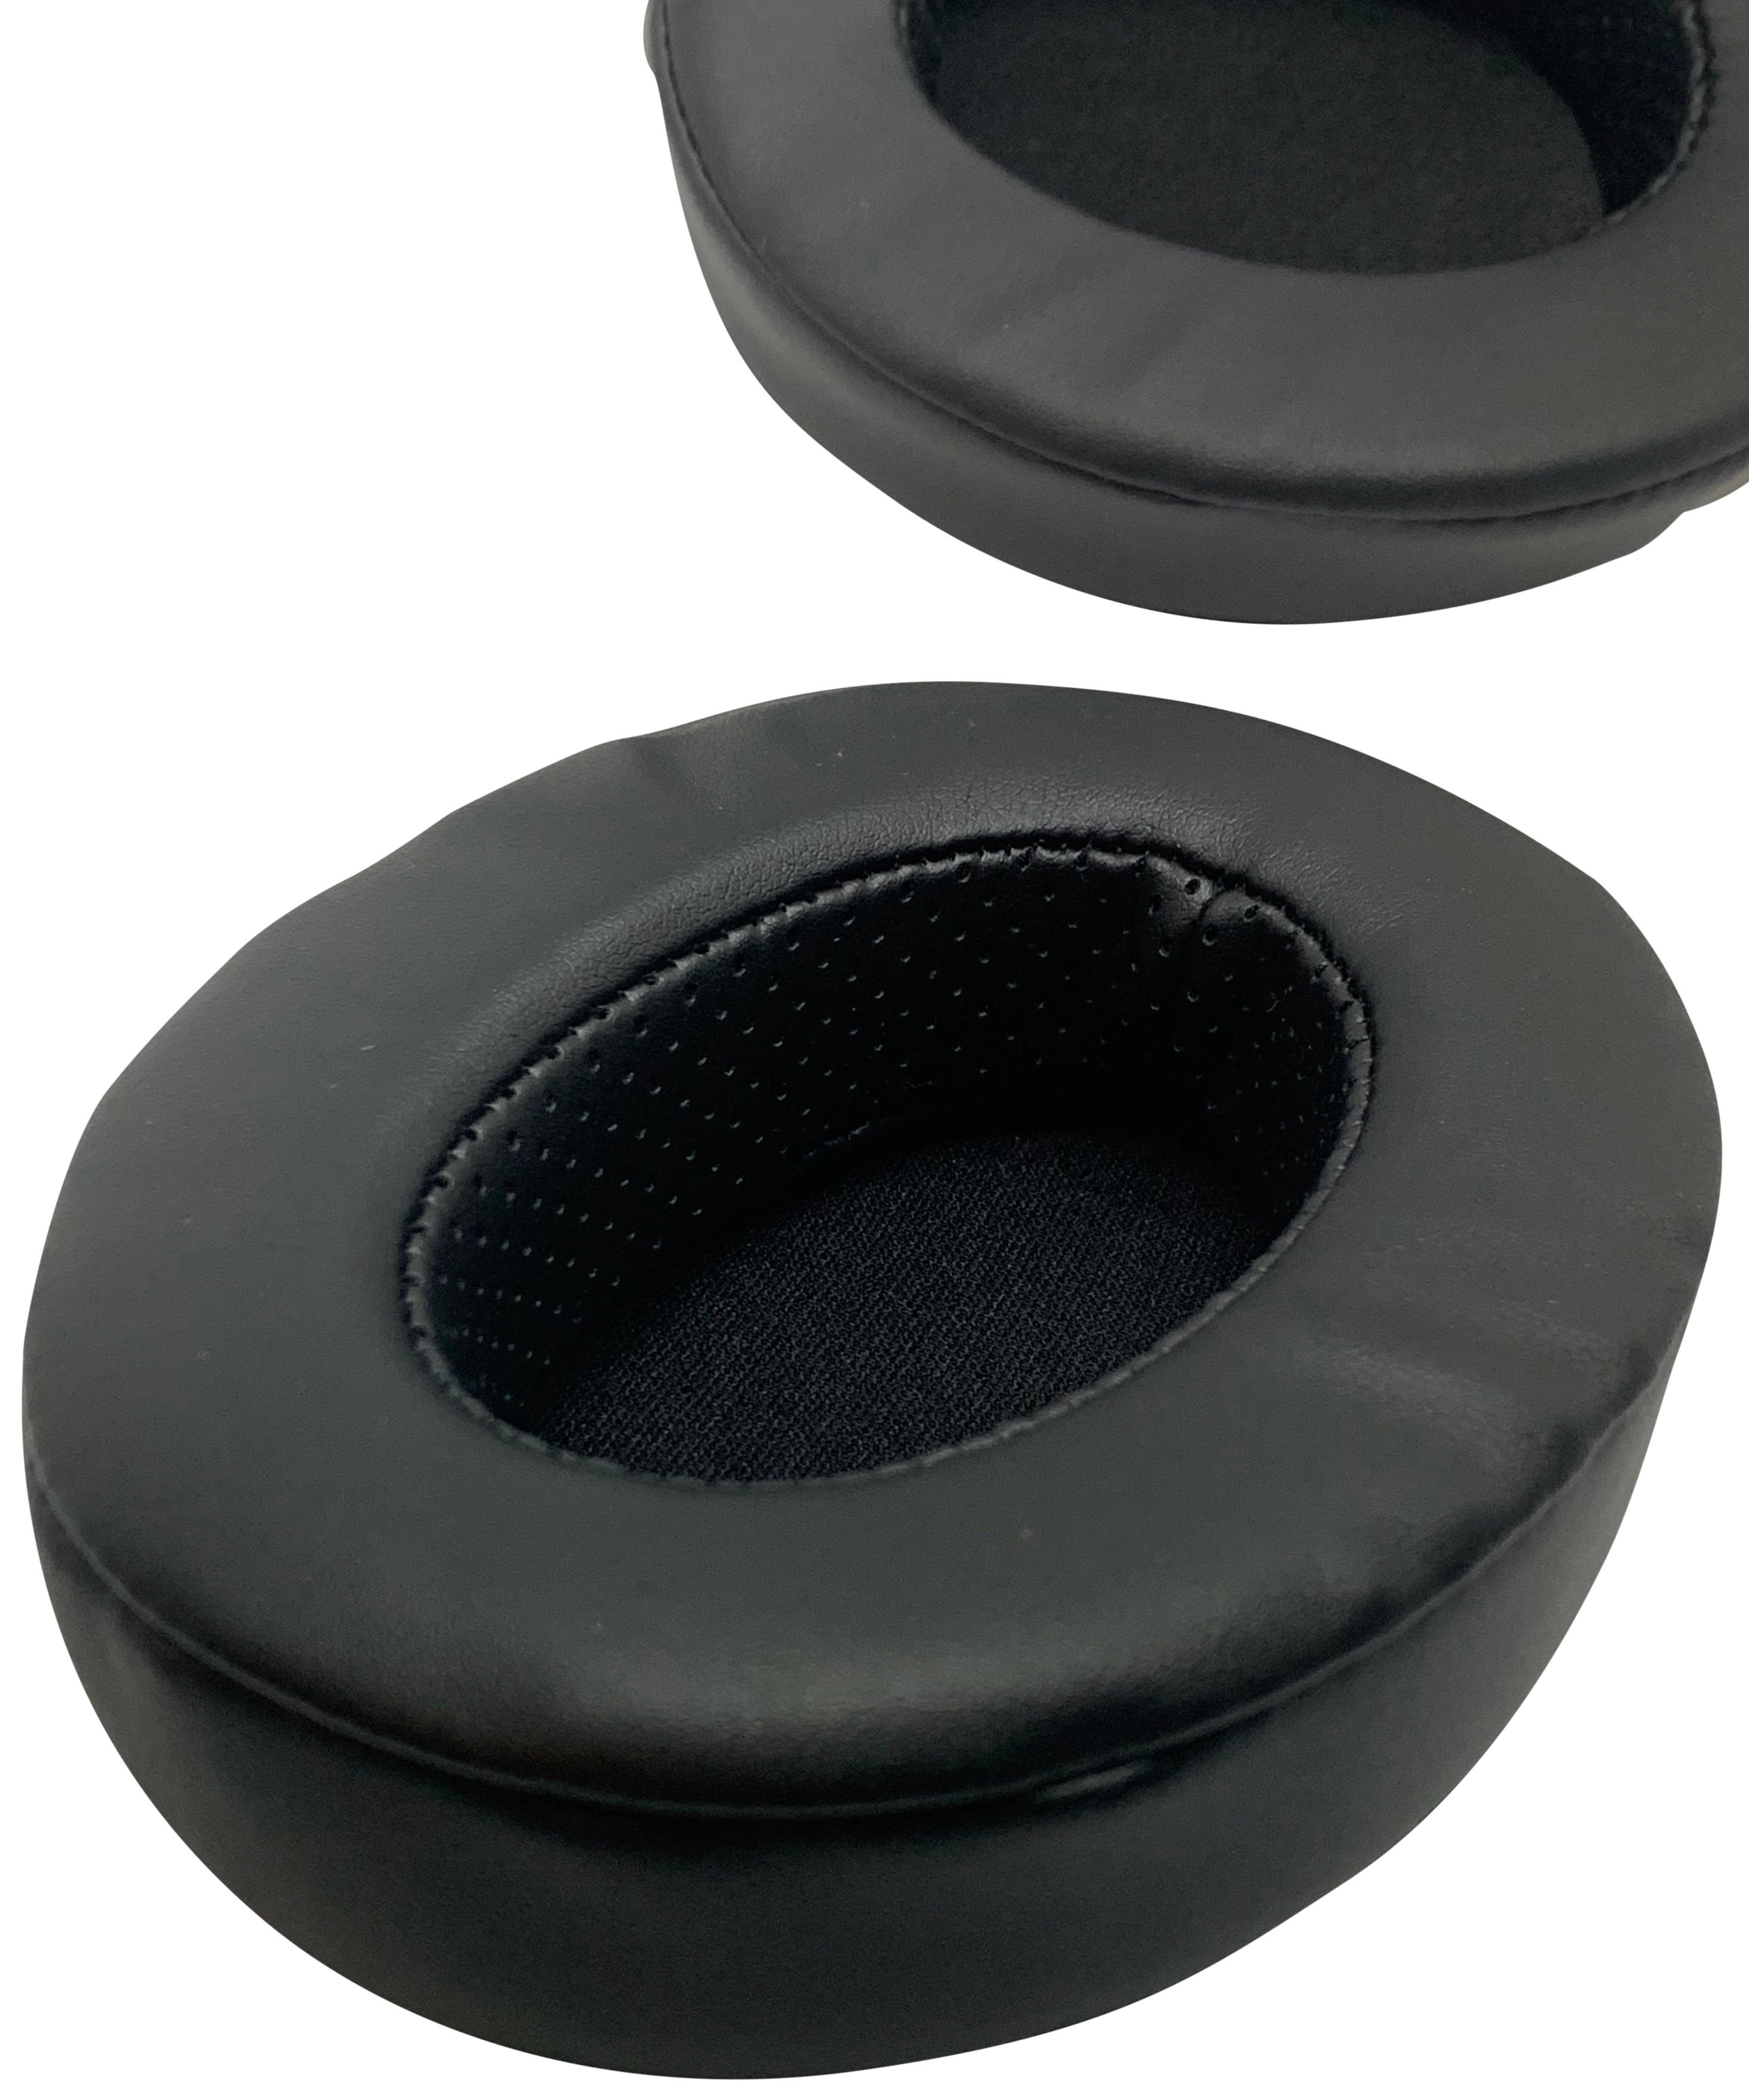 CentralSound Premium XL Upgraded Memory Foam Ear Pad Cushions for Sony MDR 7506 MDR-CD900CST MDR-V6 MDR1A Headphones - CentralSound